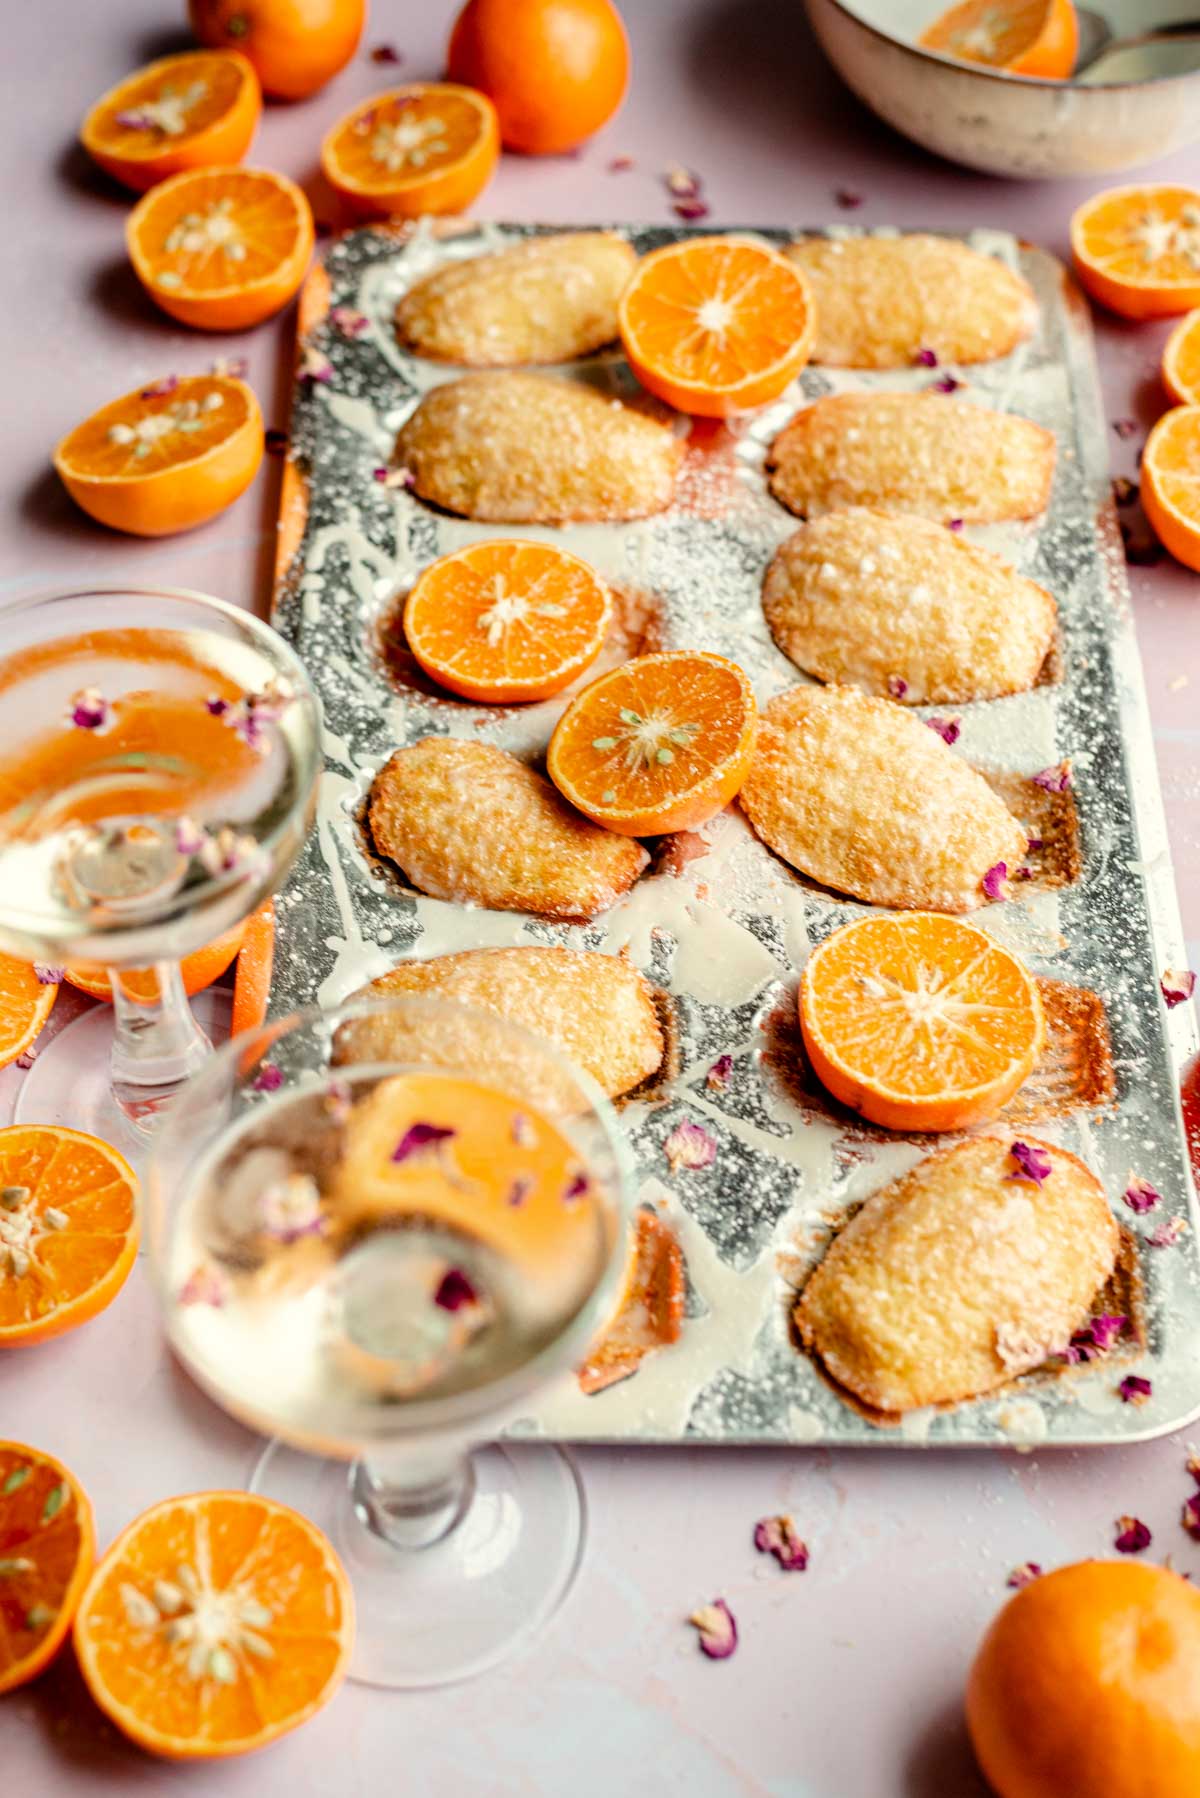 French orange madeleines in a mold with cut oranges scattered.